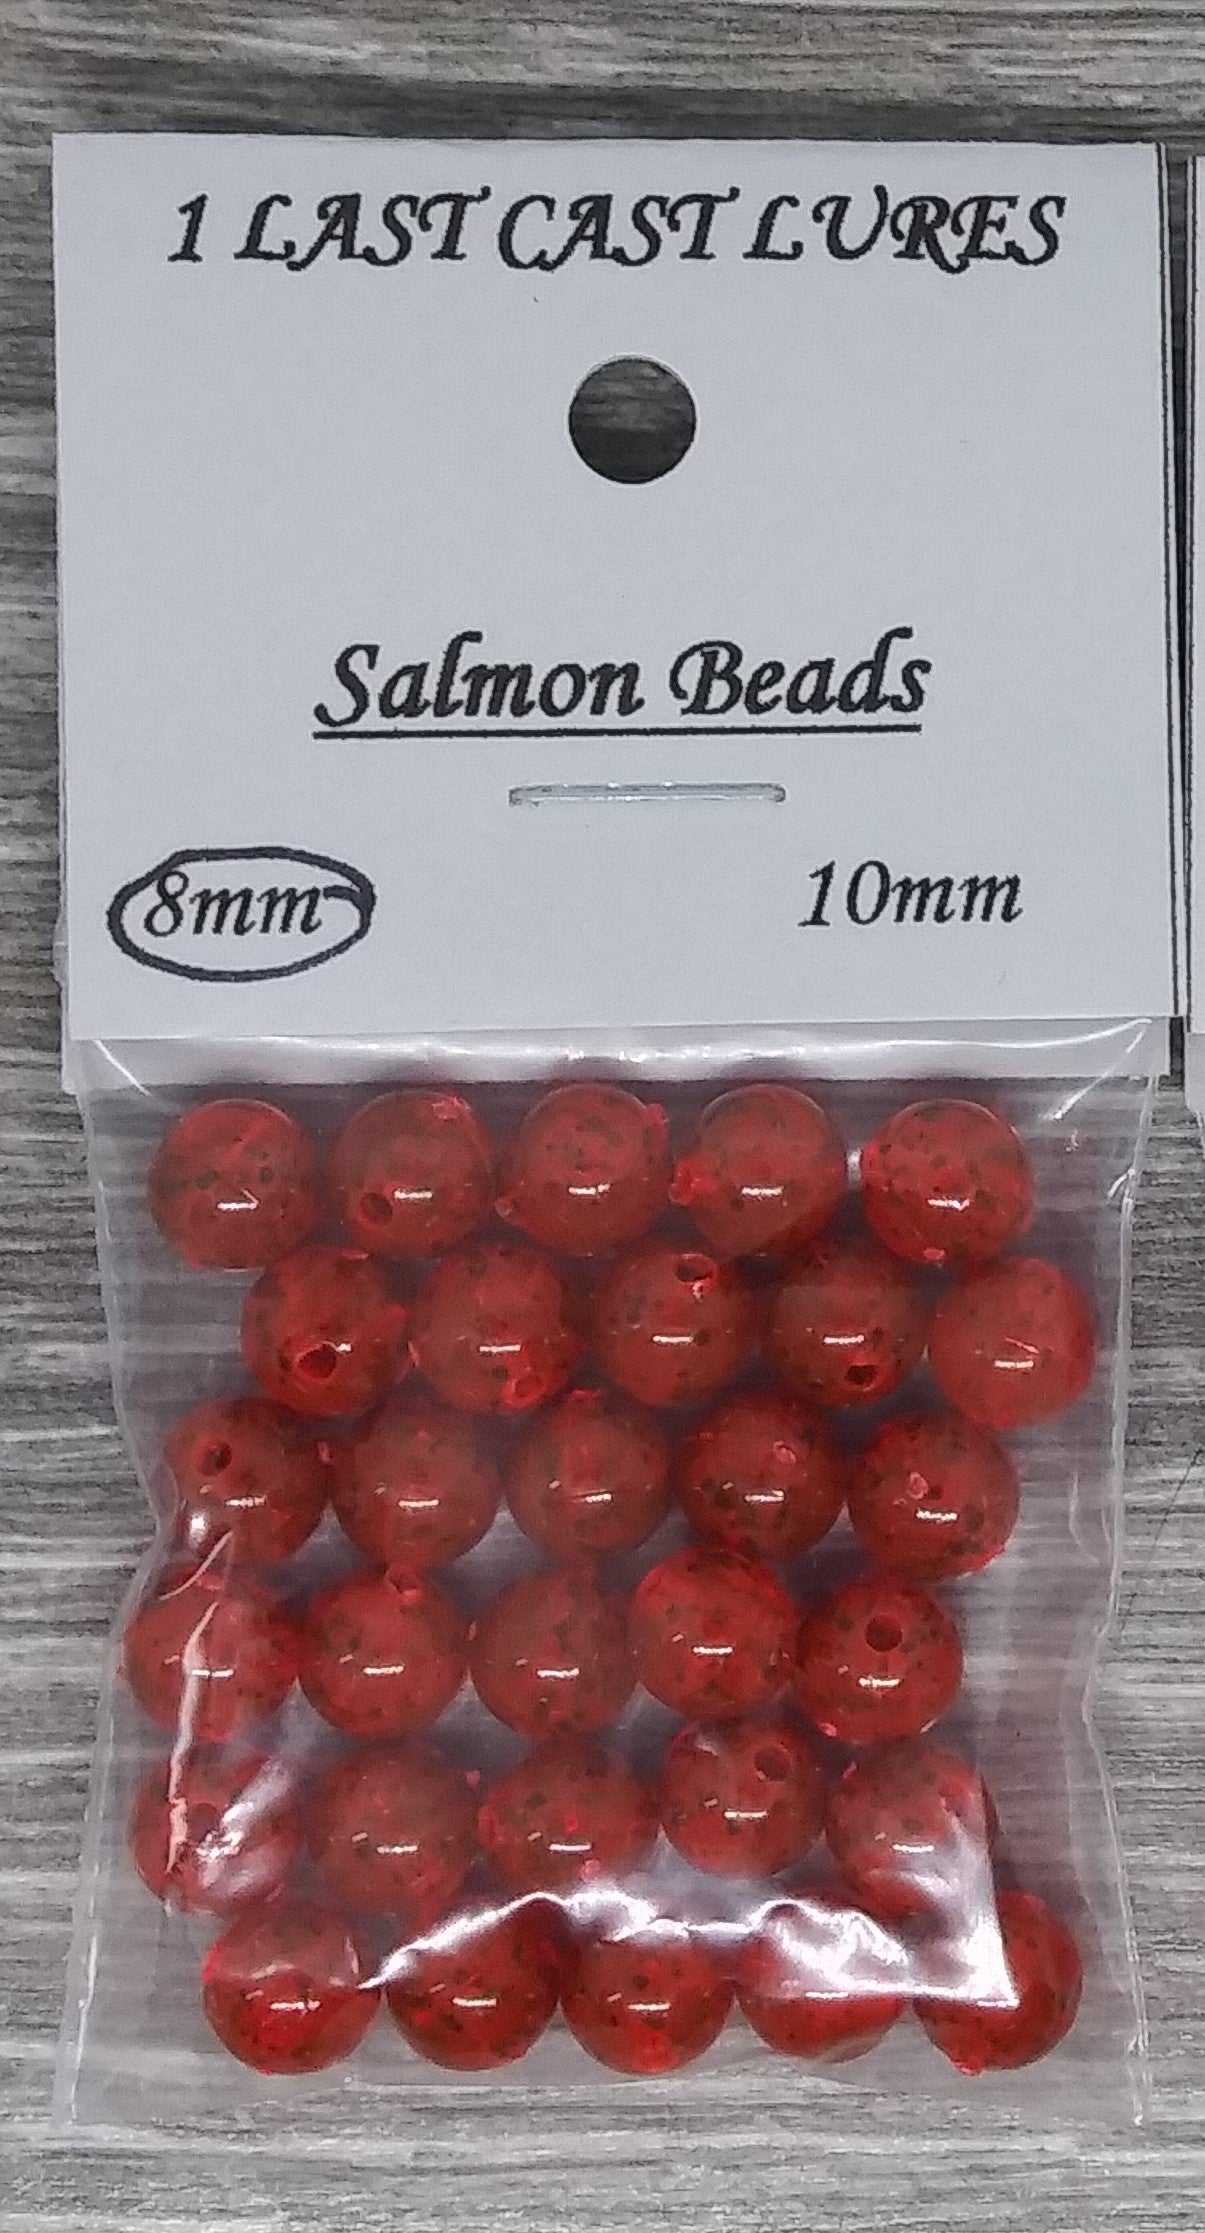 Salmon Beads Speckled